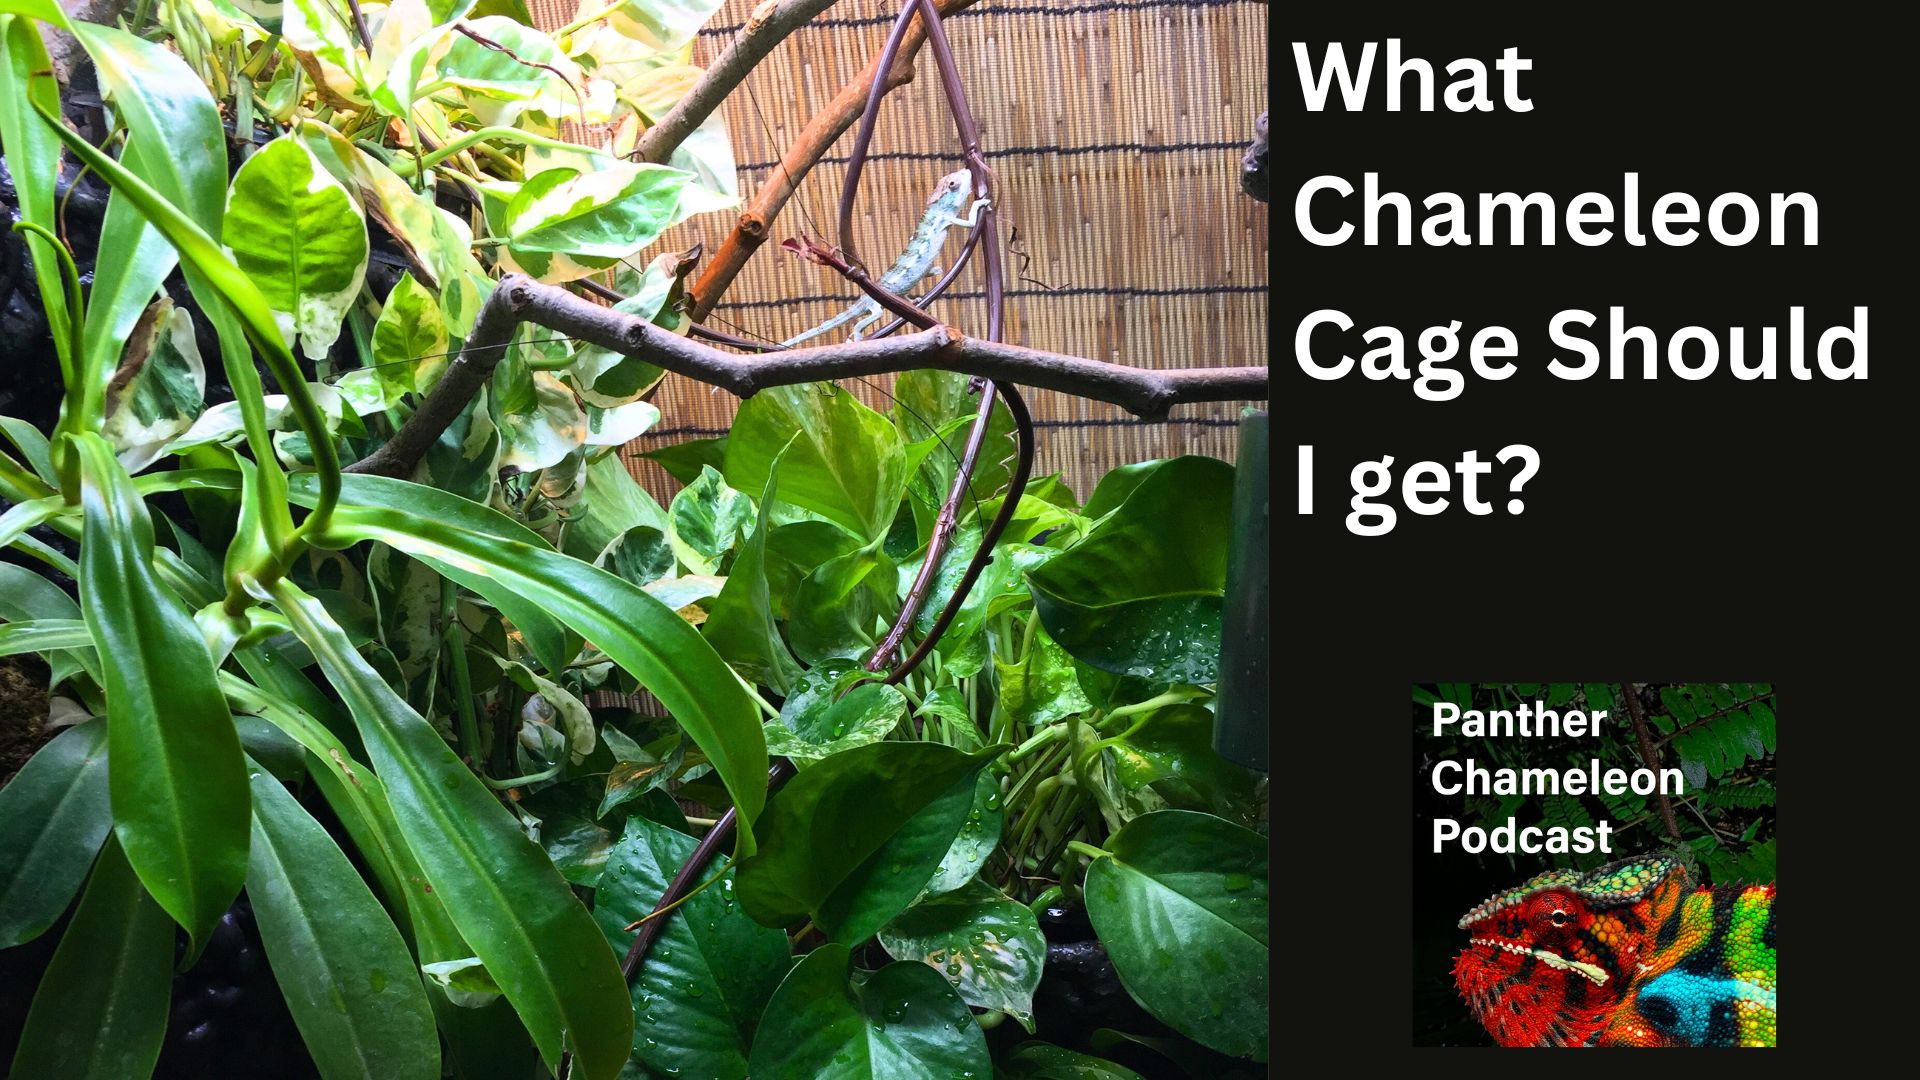 panther chameleon in a cage